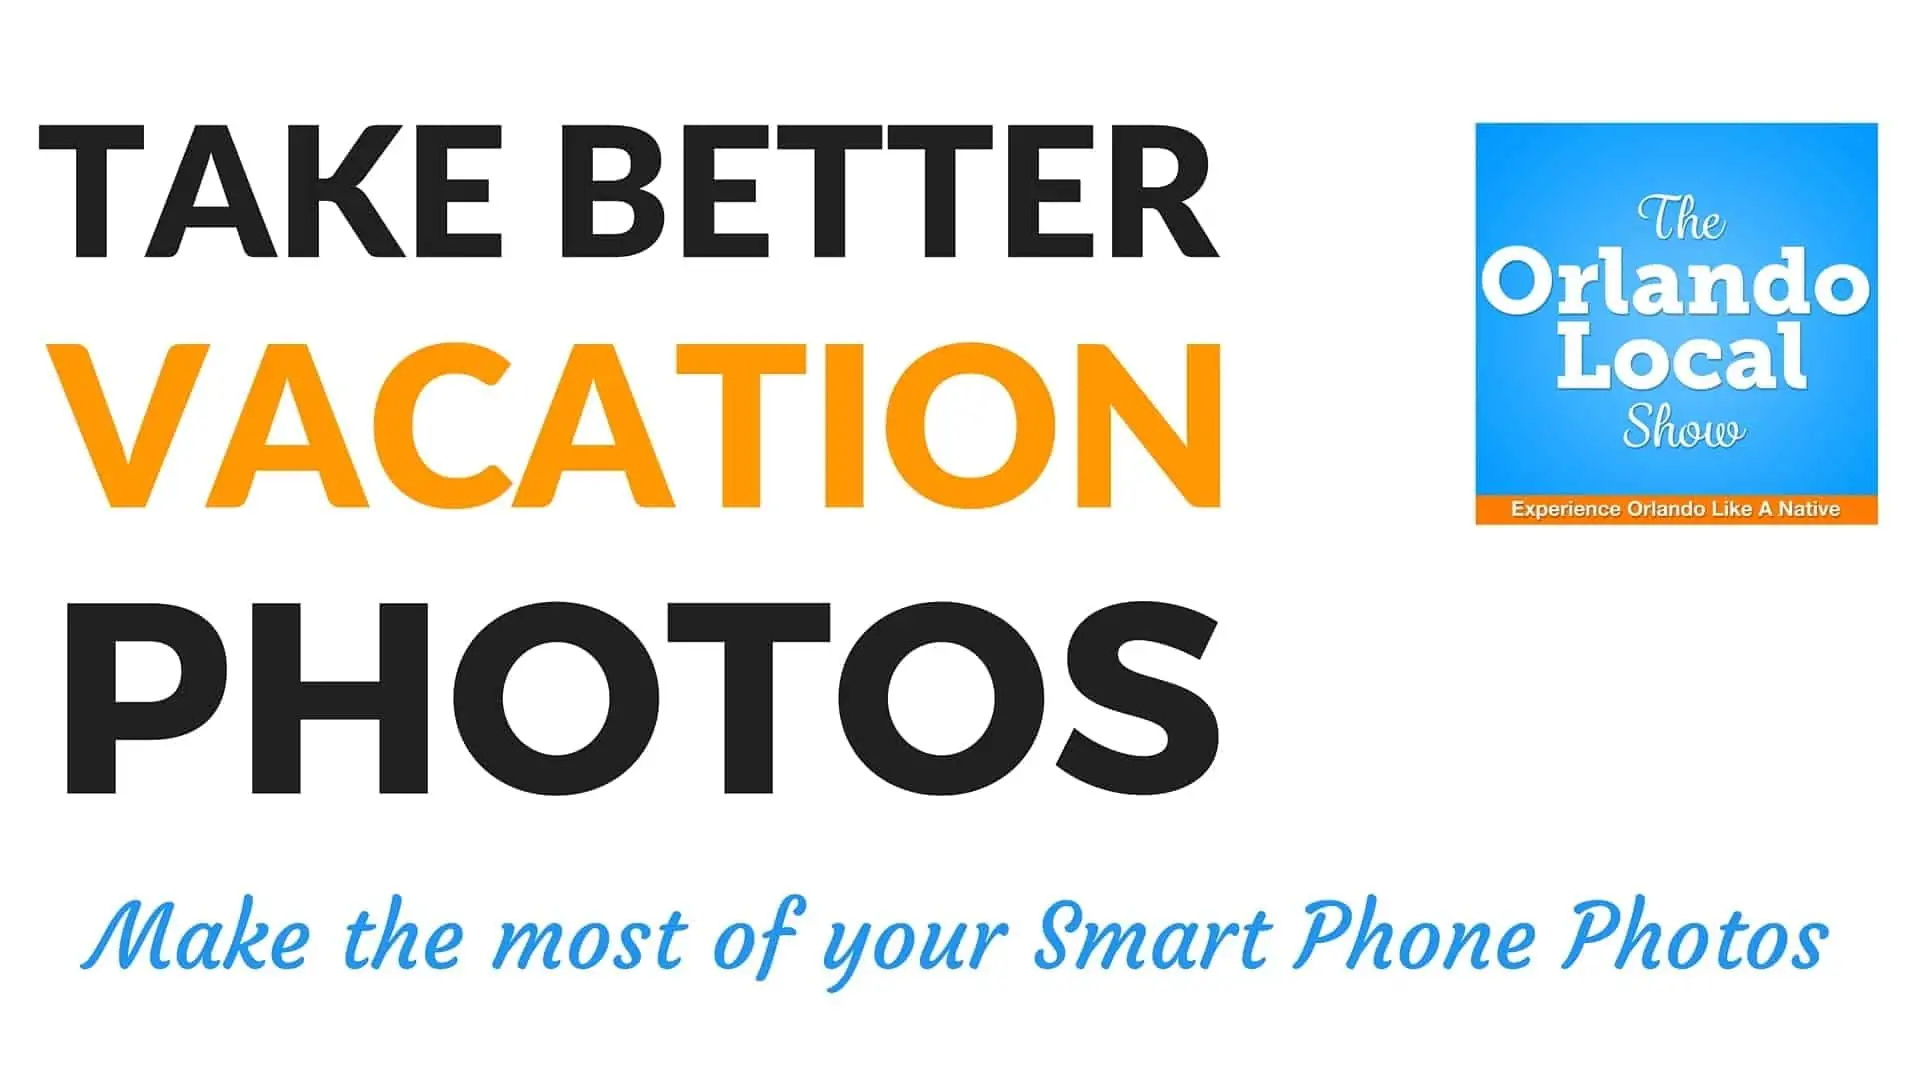 Take Better Vacation Photos